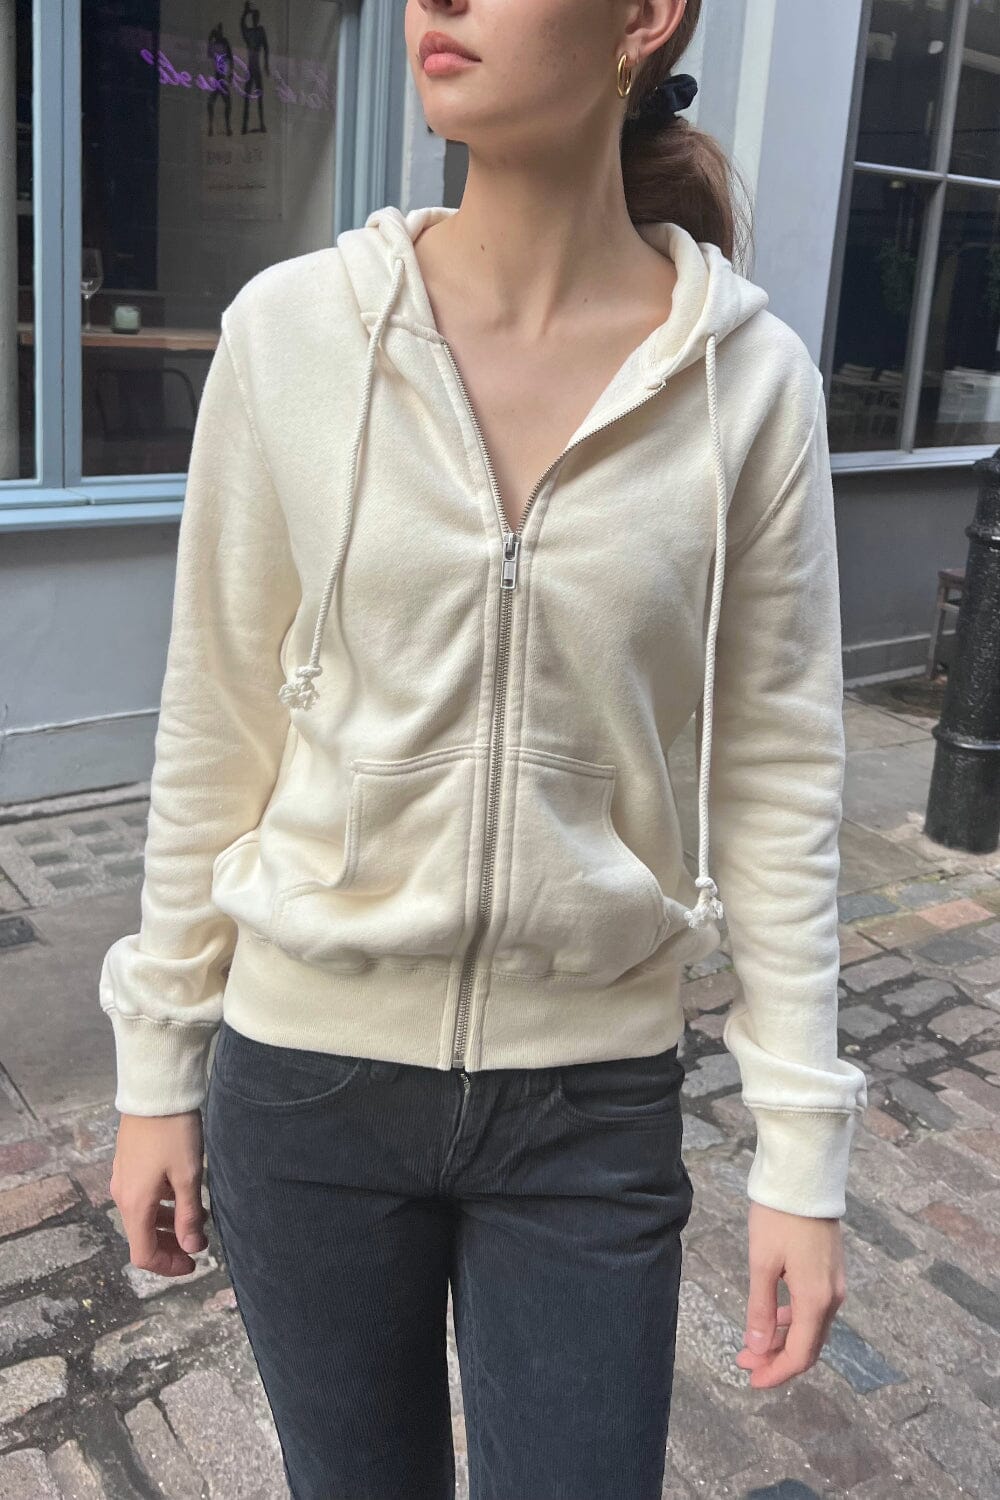 Brandy Melville Christy Hoodie - $21 (40% Off Retail) - From margaret